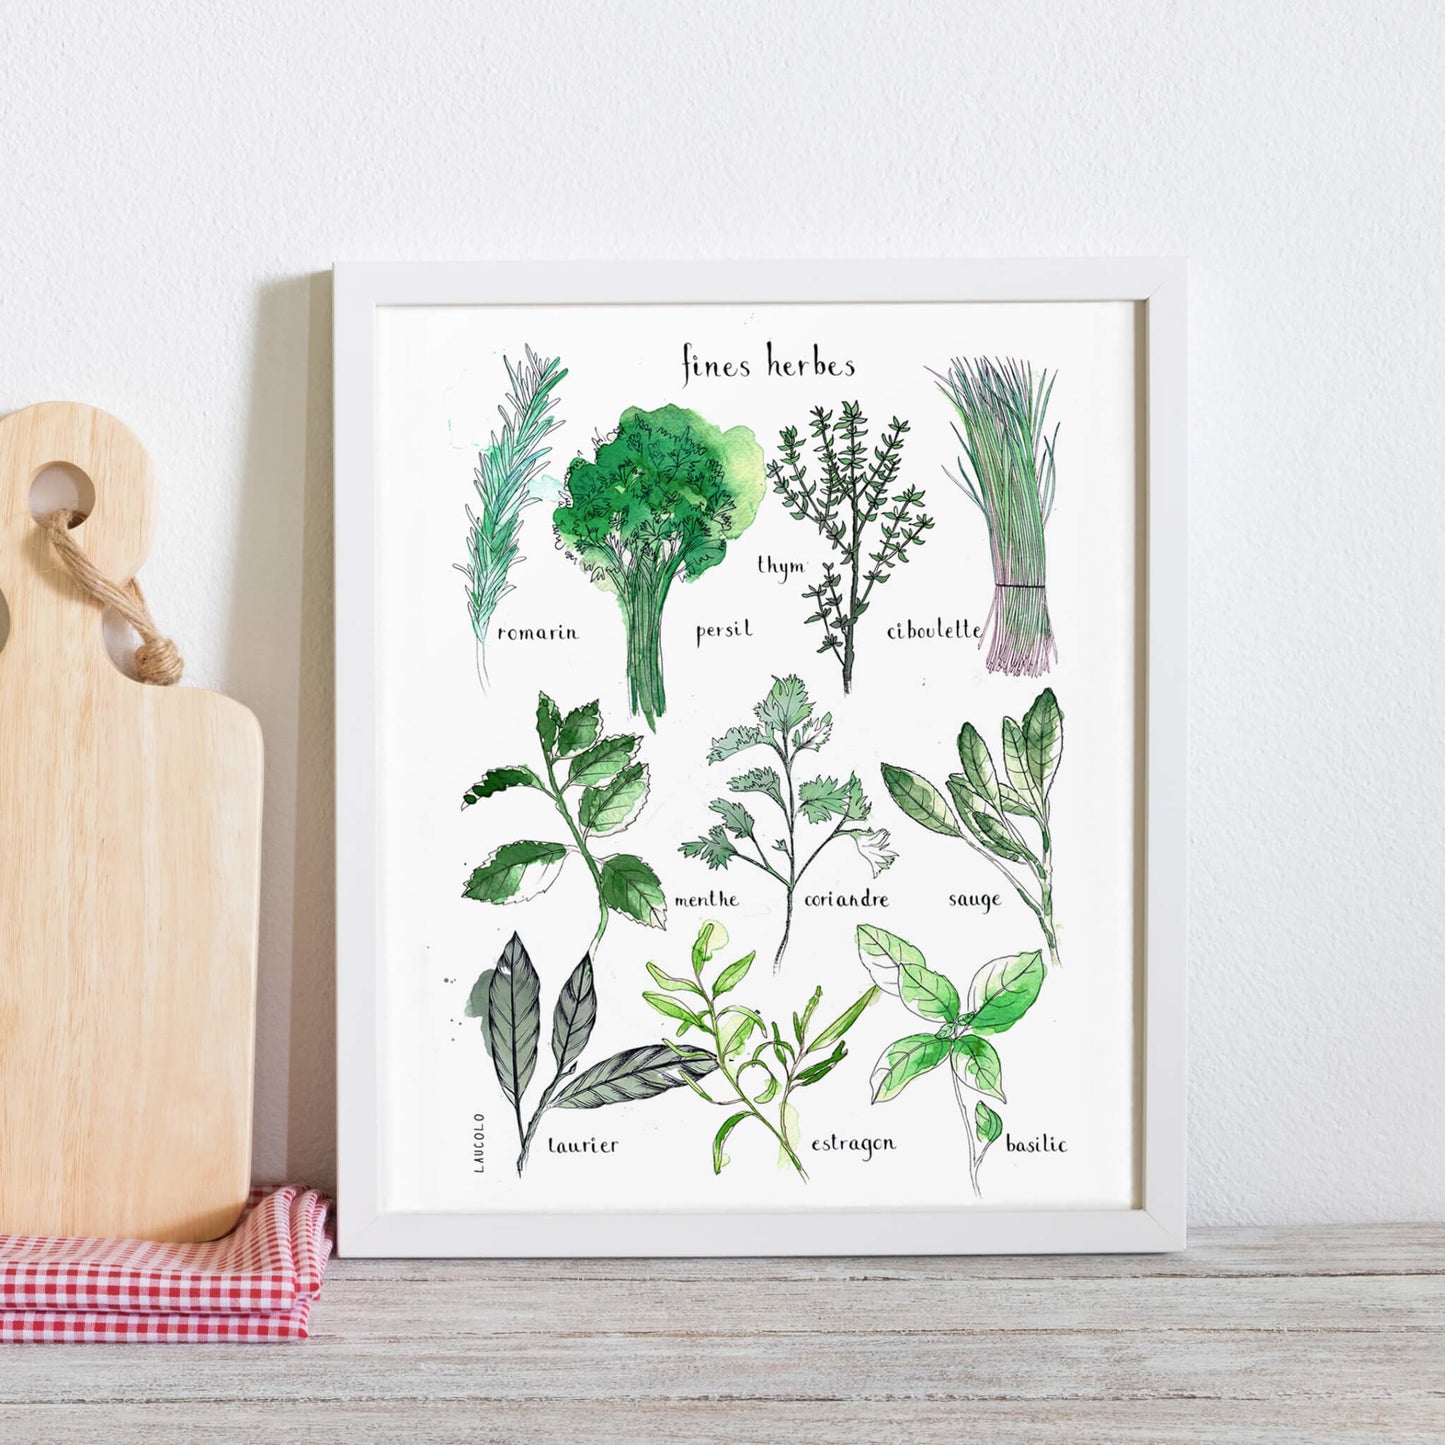 Fine herbs illustration poster leaning against wall in white frame next charcuterie board